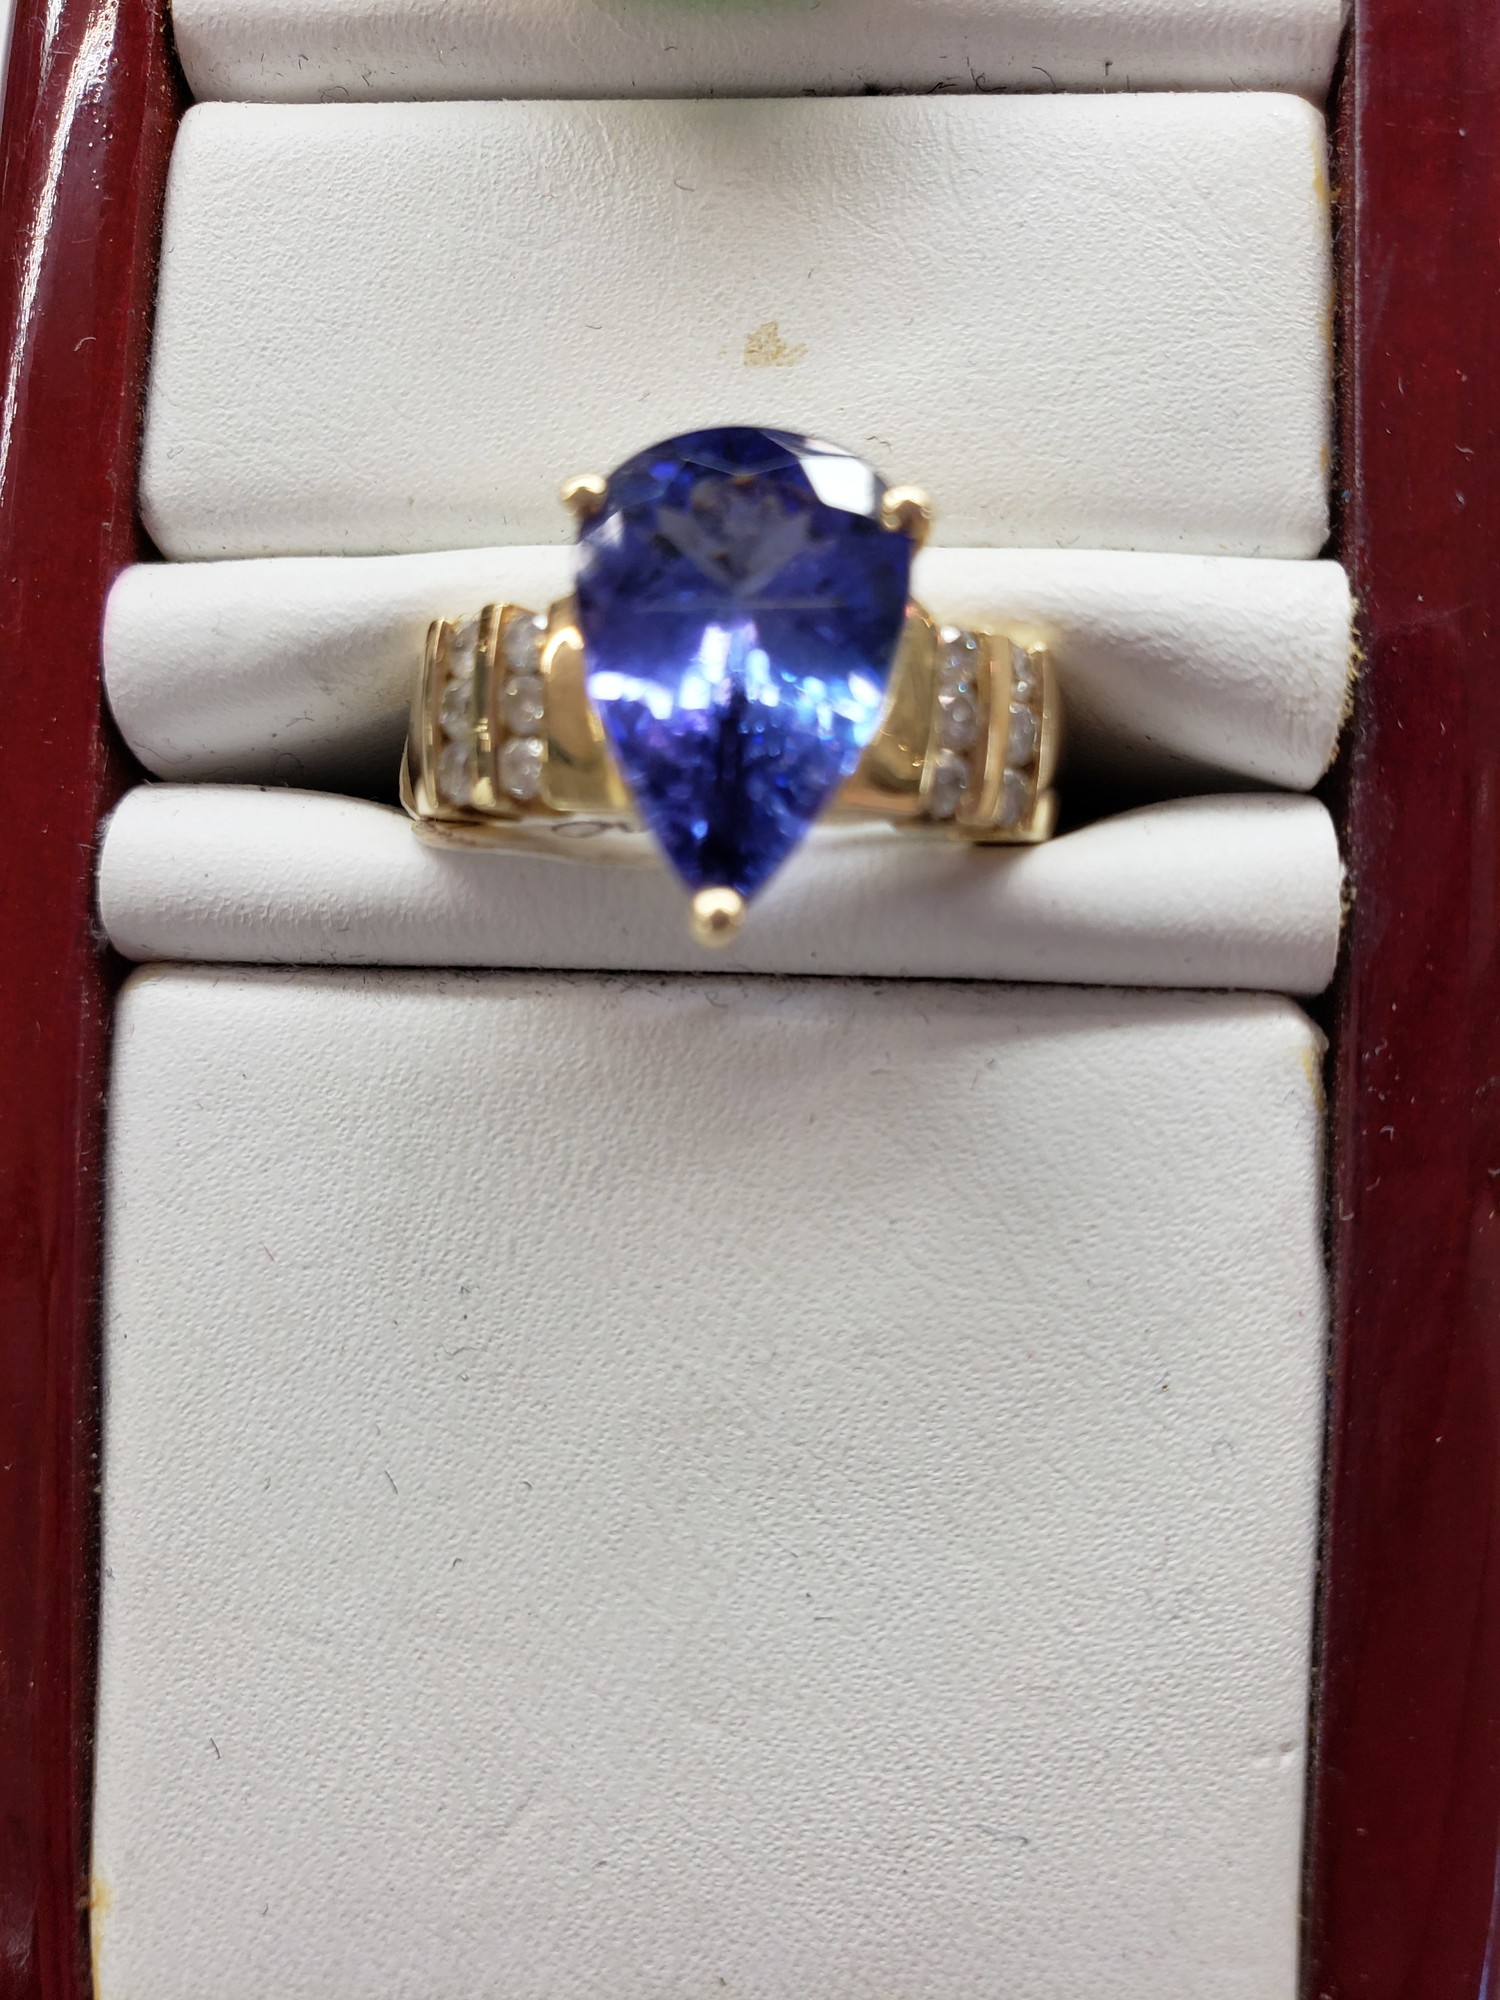 14ky 3.27ct Tanzanite and .24cts Diamond Ring
Size 7.25

Can be sized up or down for an additional fee
Pictures do not do the jewelry justice.
Photo ID required for pick up of online purchases. We will not ship jewelry purchases.

All jewelry has been checked by a Certified Gemological Institute of America (GIA) Accredited Jewelry Professional (AJP) and/or appraised by a certified local jeweler.